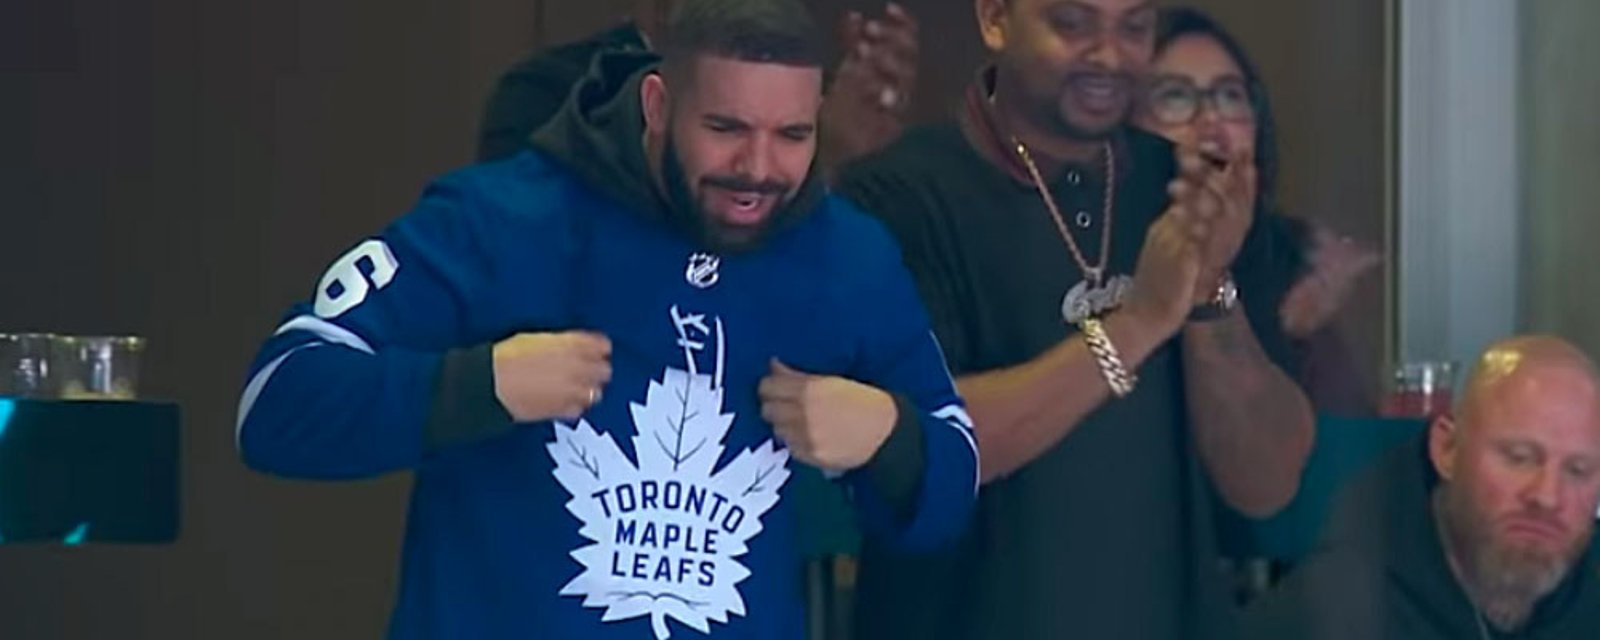 Rapper Drake forces Leafs to make changes